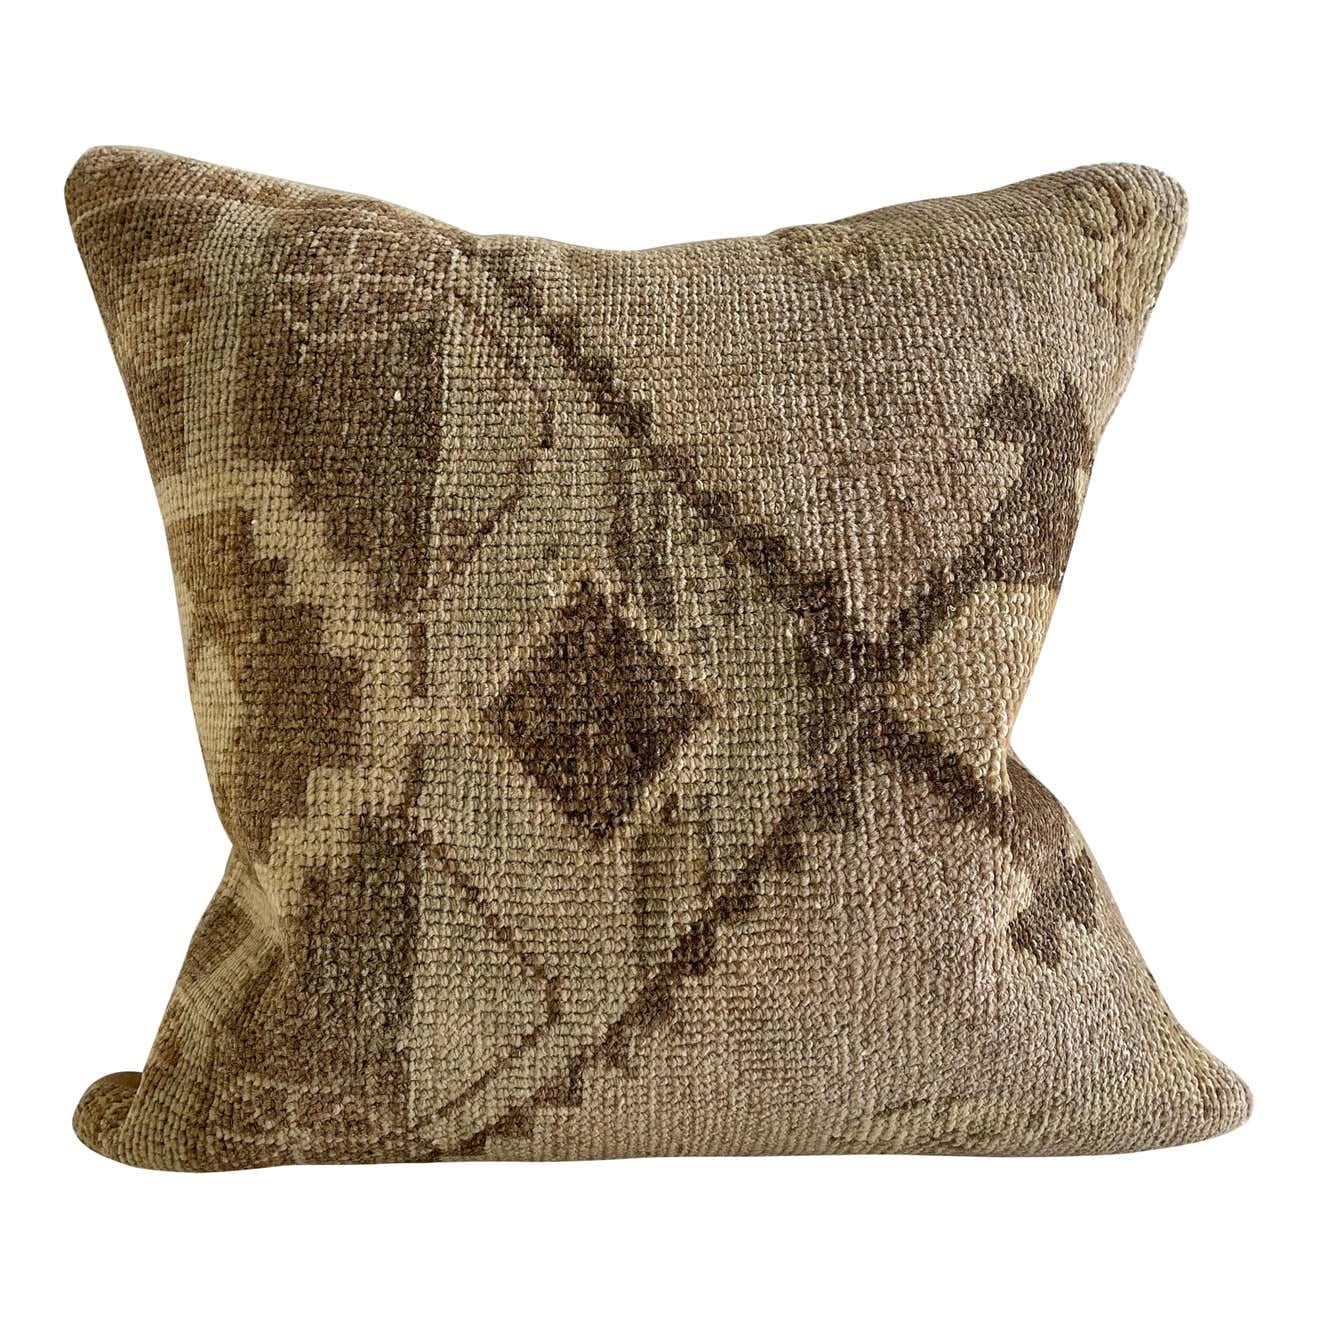 Custom made accent pillow from a beautiful 19th c Turkish rug. all textiles have been professionally cleaned prior to construction. Colors: Browns, creams, taupes, and neutral tones. Backside is natural cotton.
Size 18” x 18”.